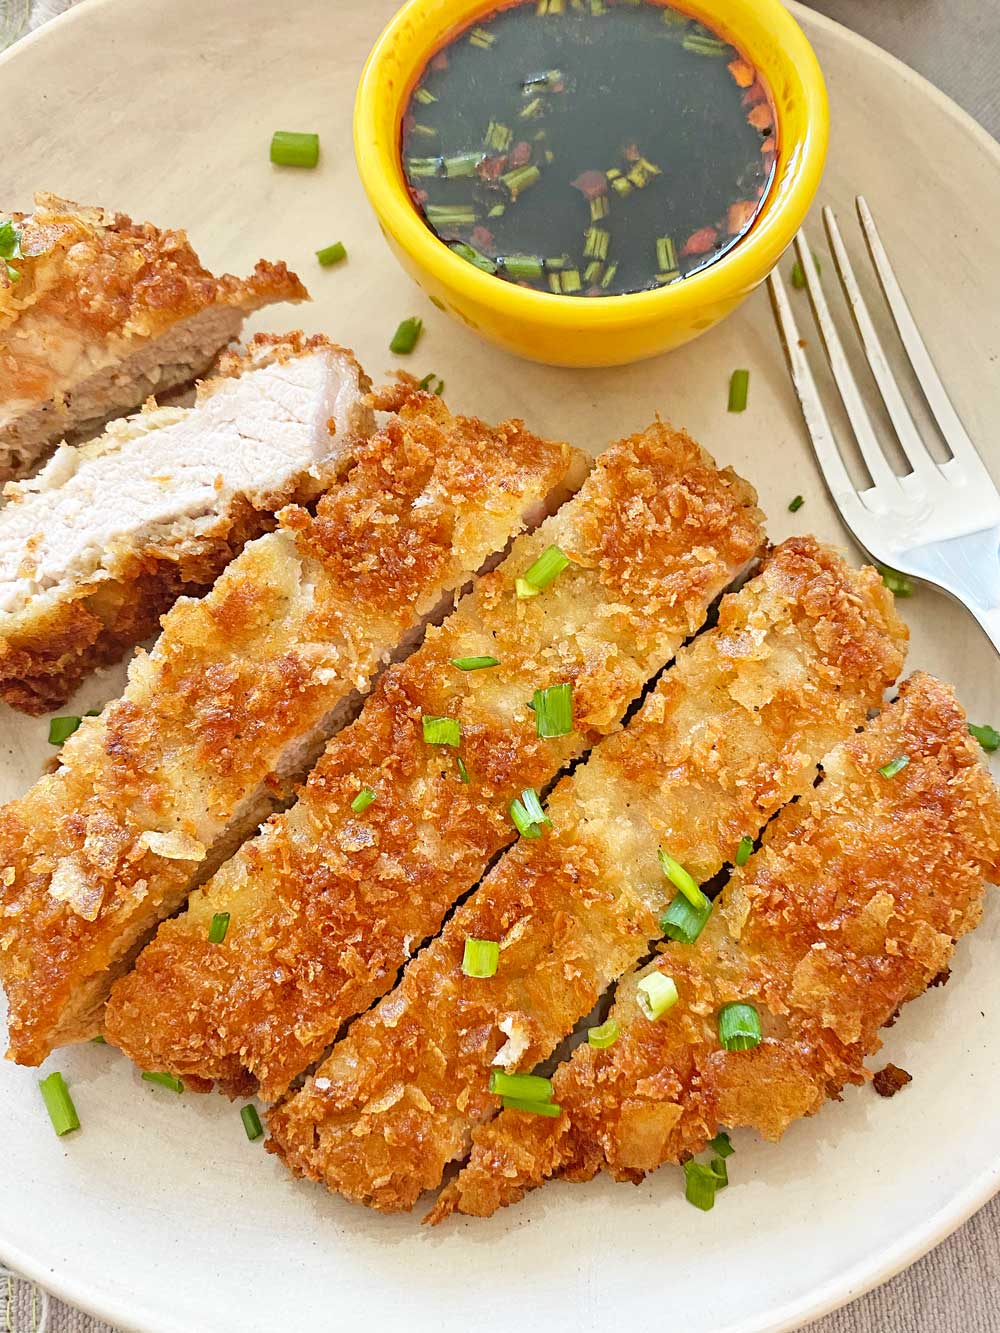 Potato Chip Crusted Pork Cutlet. Grab your potato chips, pork, and tea  brine. This is easy weeknight dinner with sandwich leftovers. Happy Cooking! www.ChopHappy.com #porkcutlet #potatochip